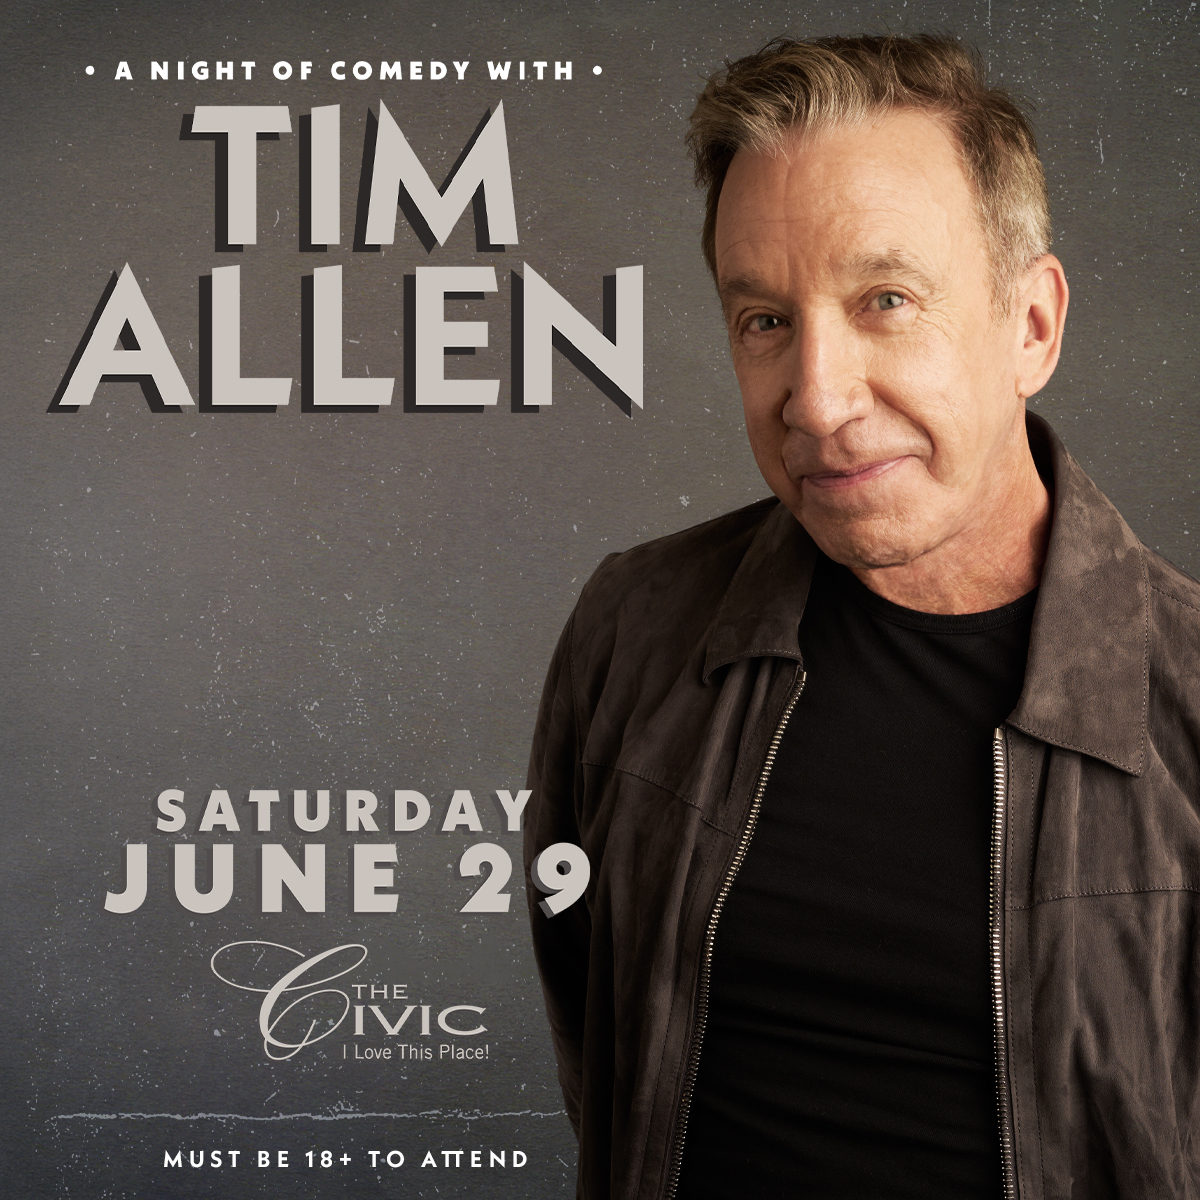 On Sale TODAY! A Night Of Comedy with Tim Allen June 29th at the Akron Civic Theatre. Get your tickets today! 🎟ticketmaster.com/event/05006076…